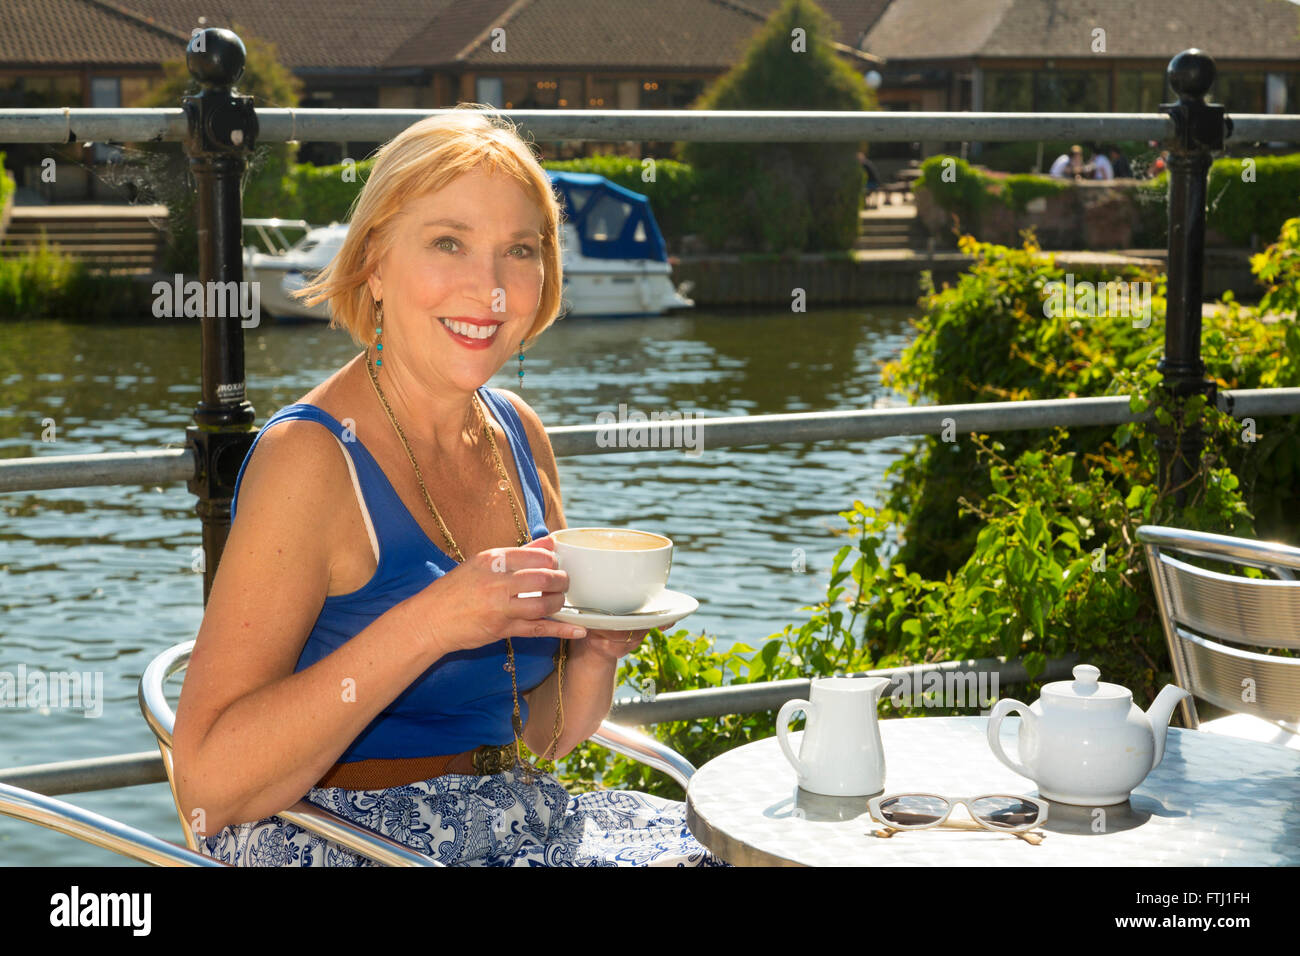 woman drinking cup of coffee outdoors next to a river Stock Photo